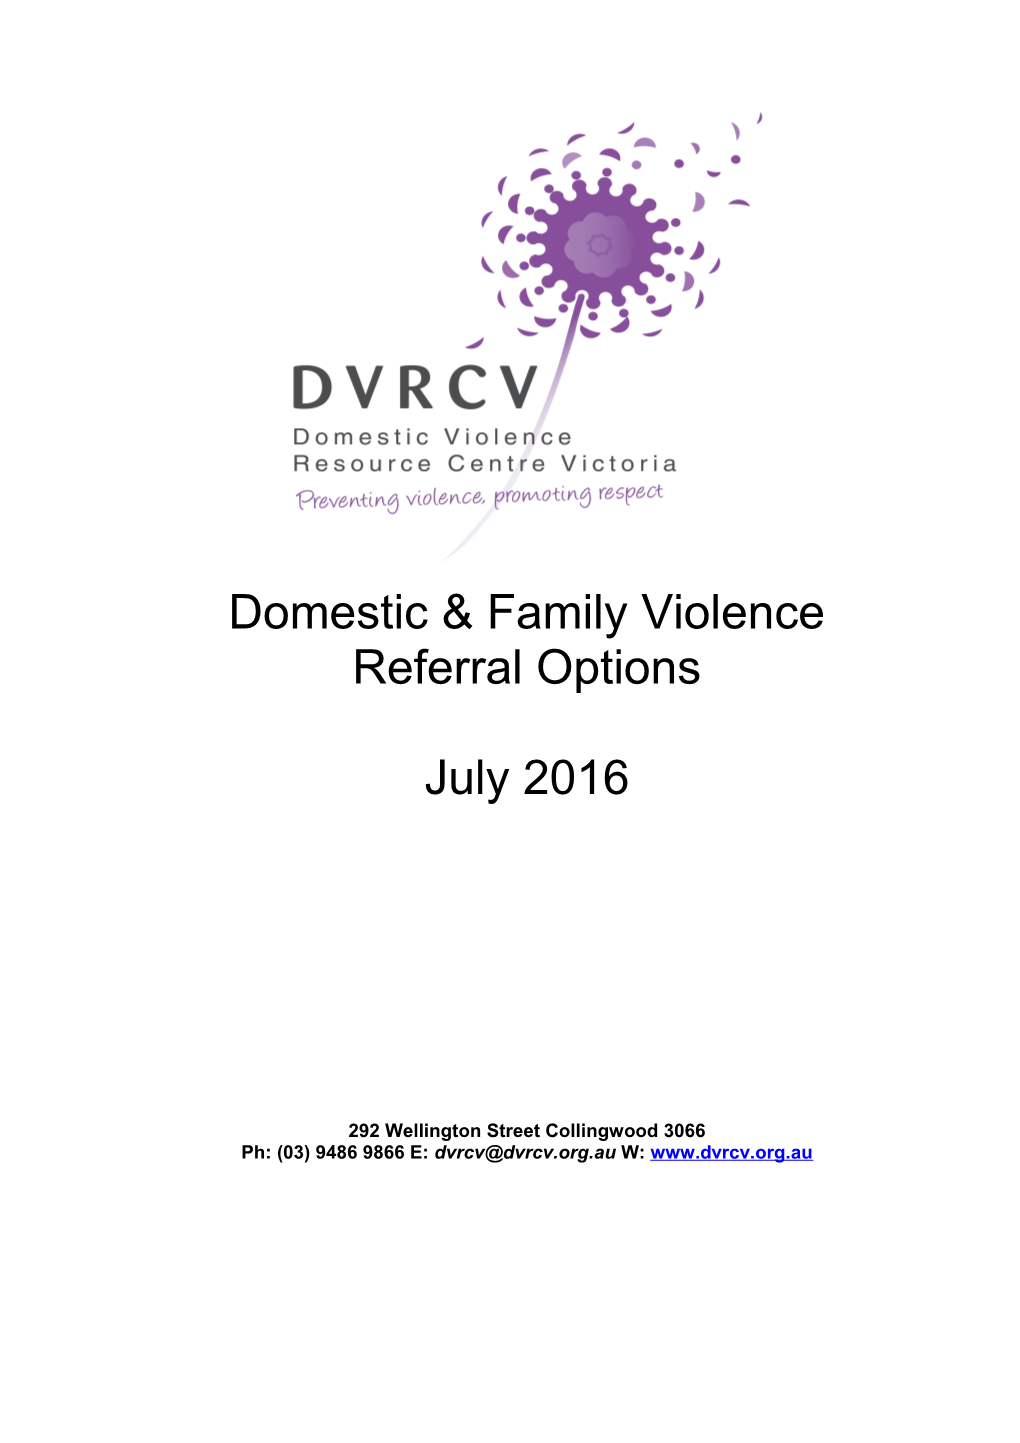 Women's Family Violence Support Services 5